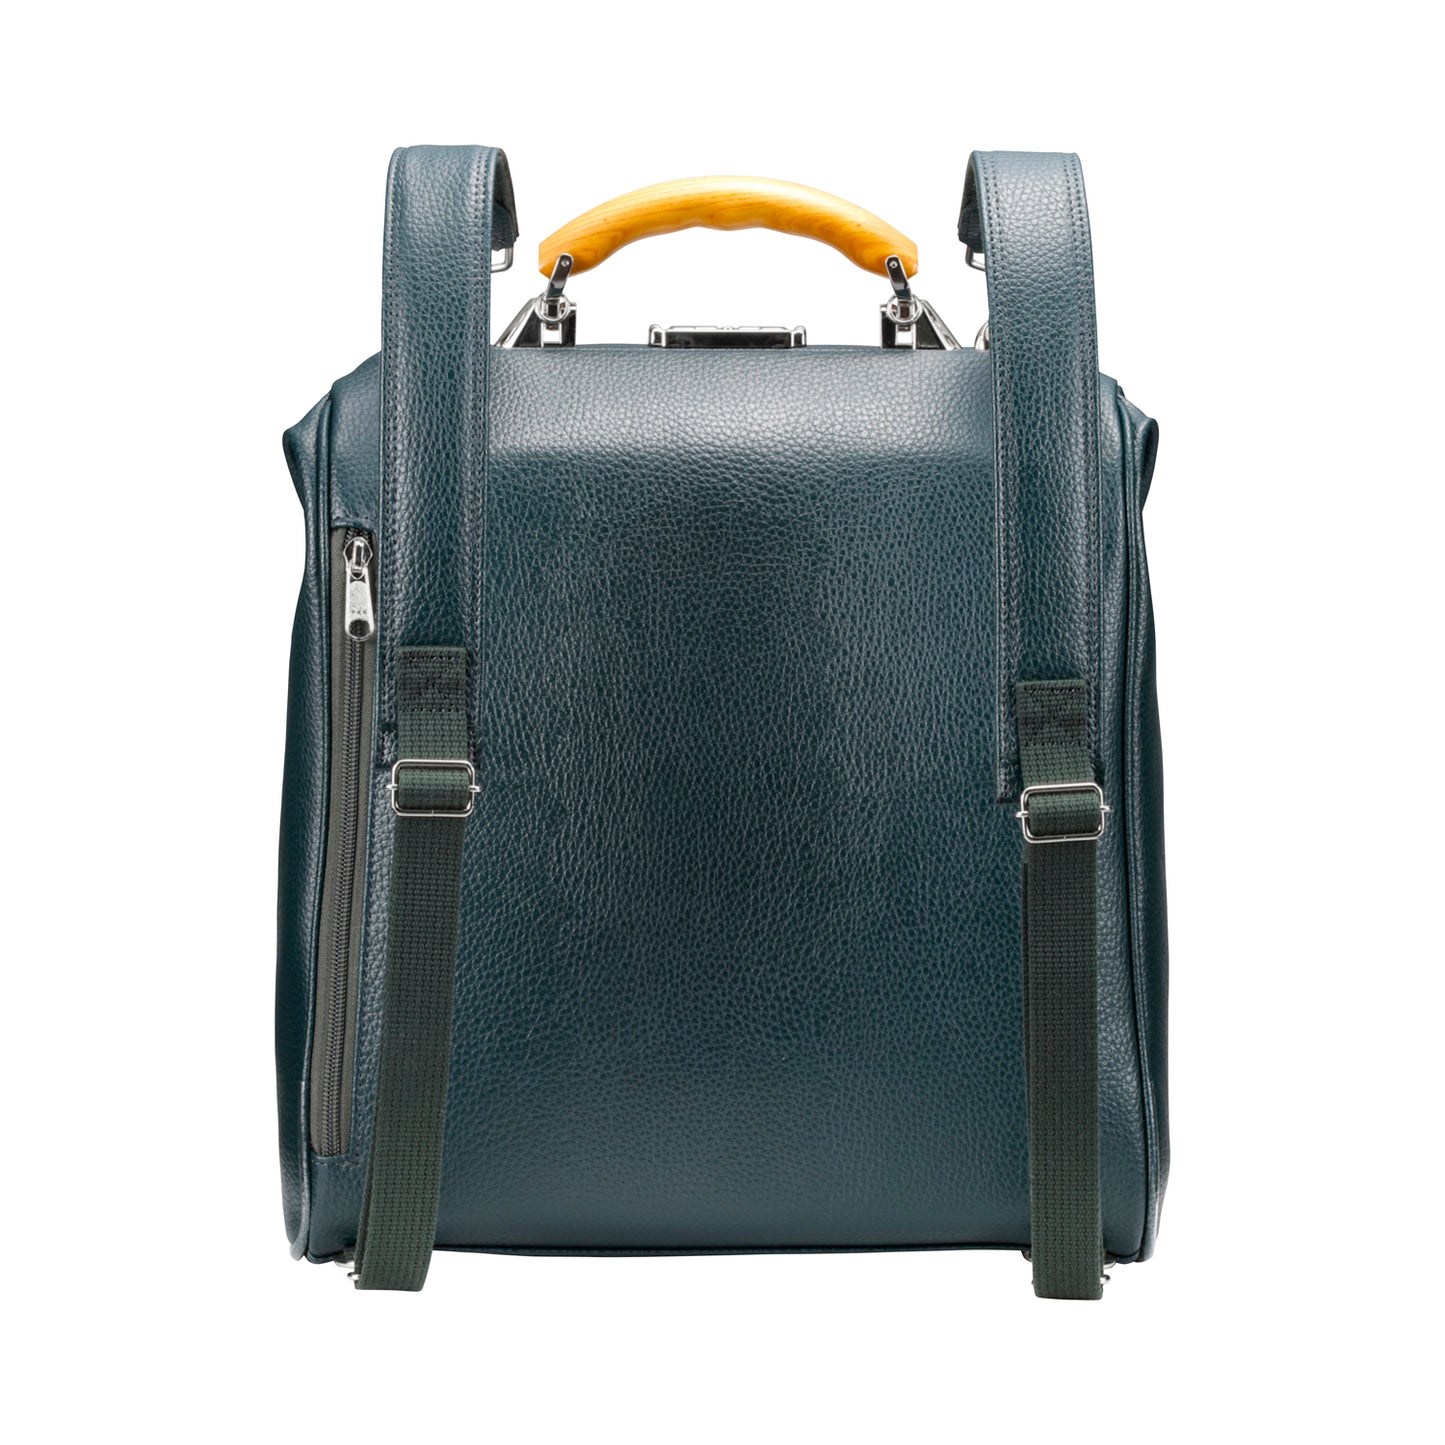 ◆Toyooka Bags Certified [Long Lacquer-painted Wooden Handle SET] Dulles Bag Toyooka Bags M Size YK3ME [ELK] Dark Green